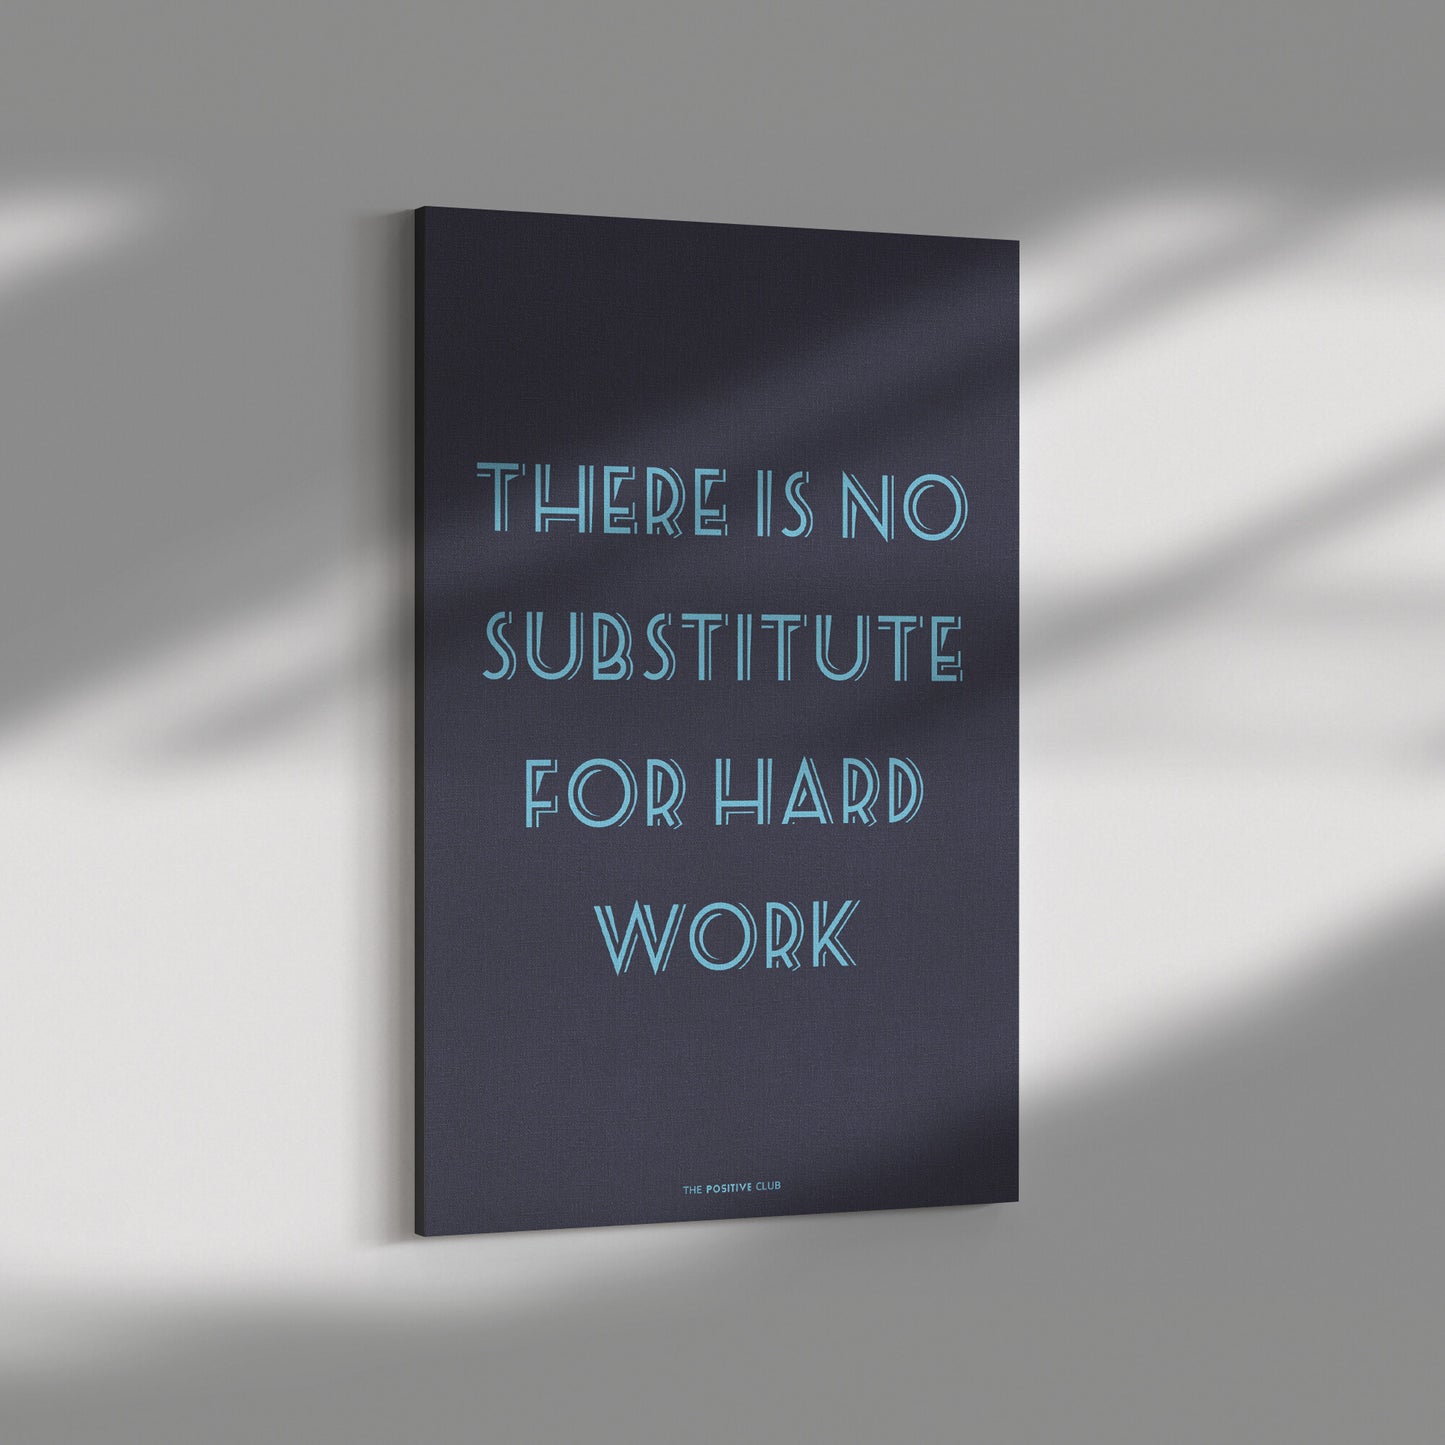 THERE IS NO SUBSTITUTE FOR HARD WORK